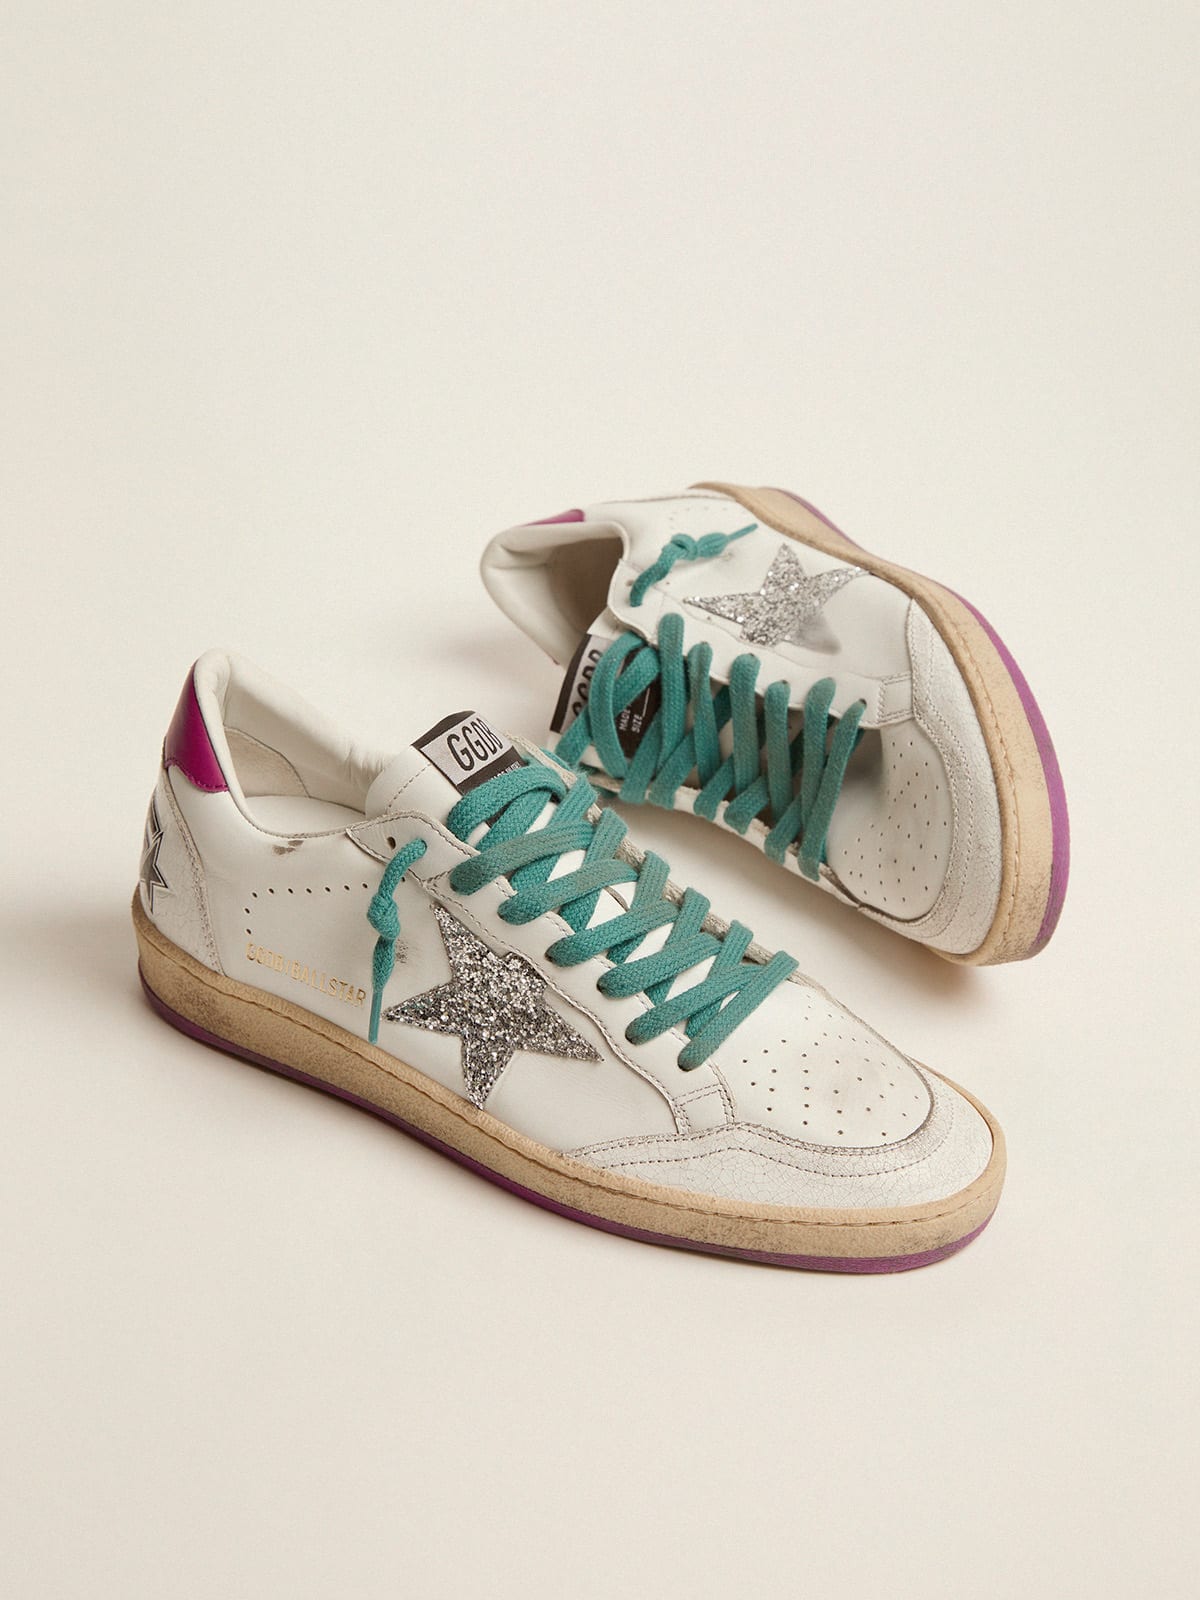 Ball Star LTD sneakers in leather with purple heel tab and silver star ...